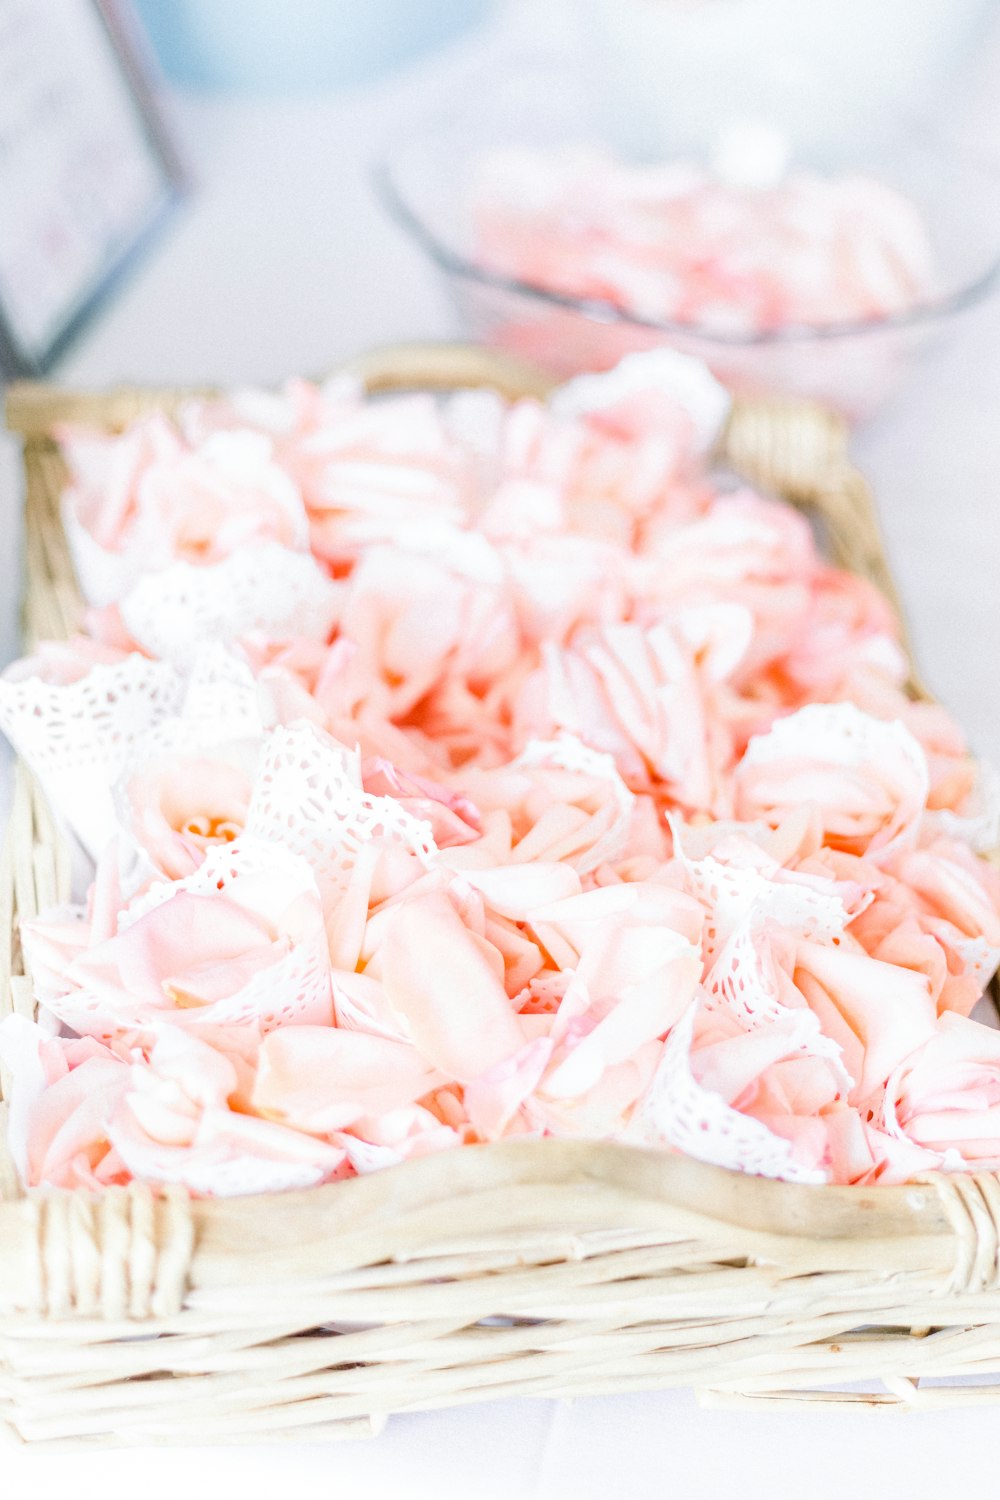 pink and white flower petals on clear glass bowl